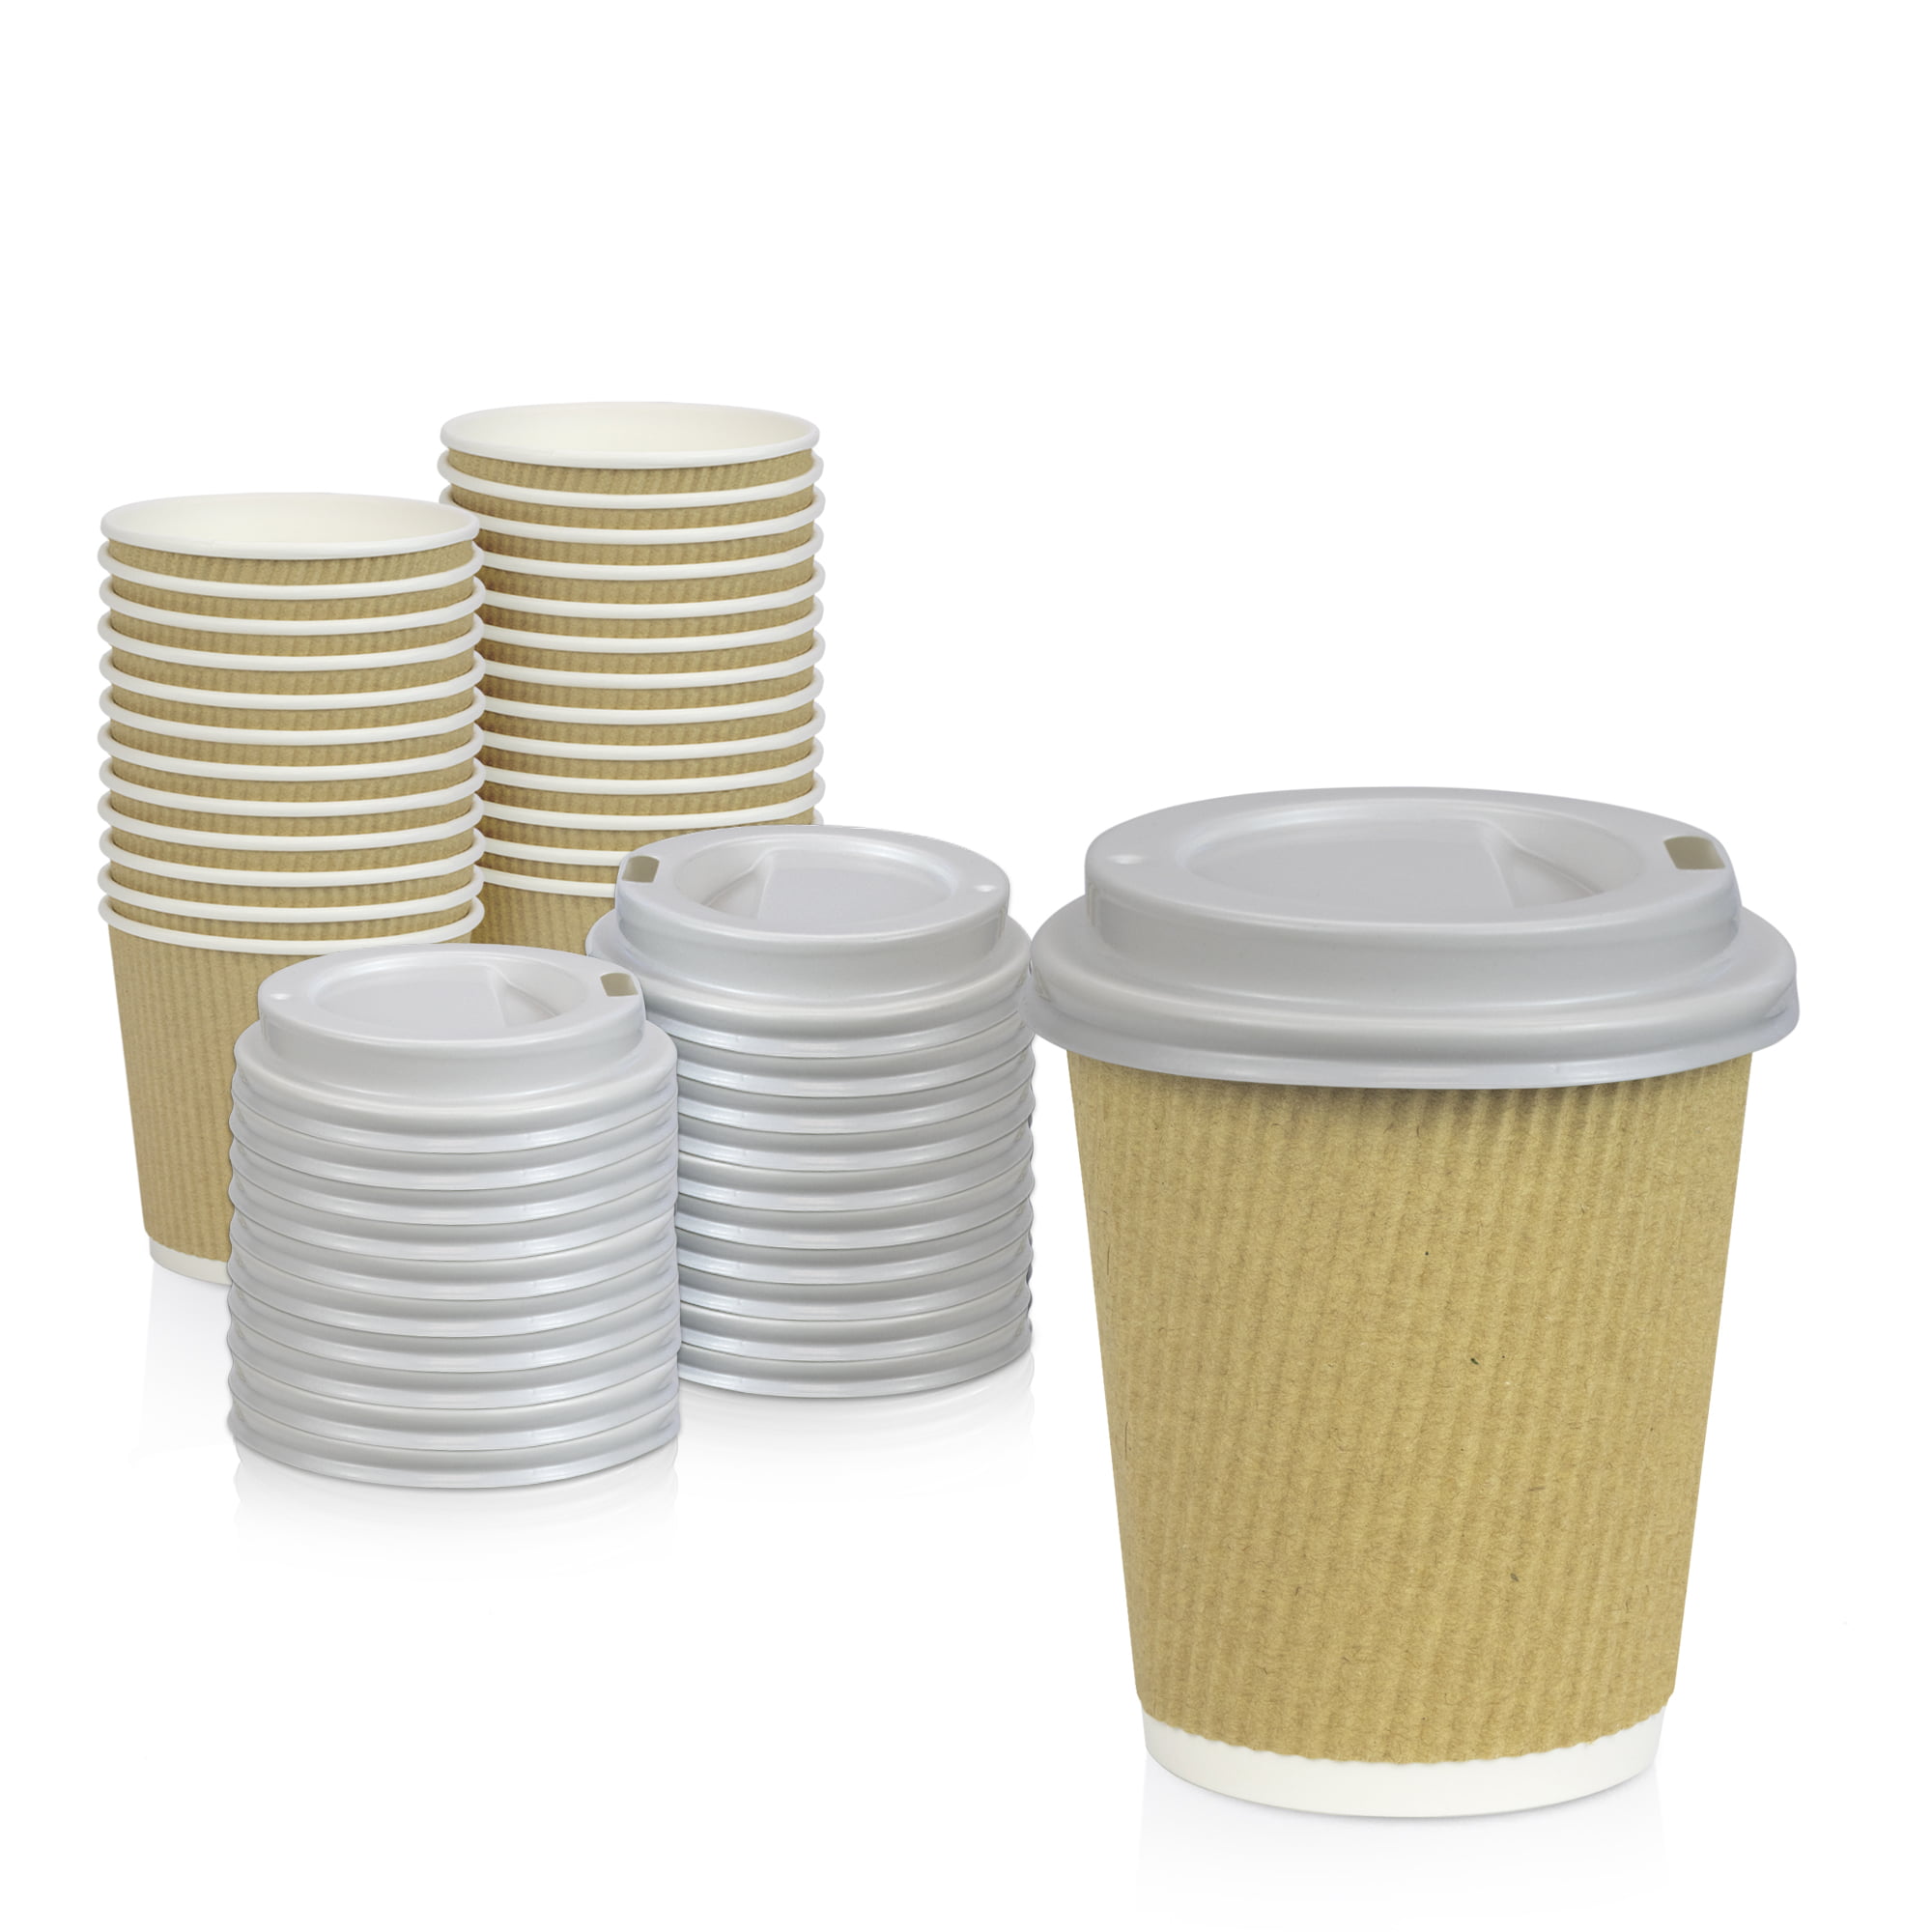 8oz Insulated Ripple Disposable Paper Coffee Cups and Lids White Green Brown New 